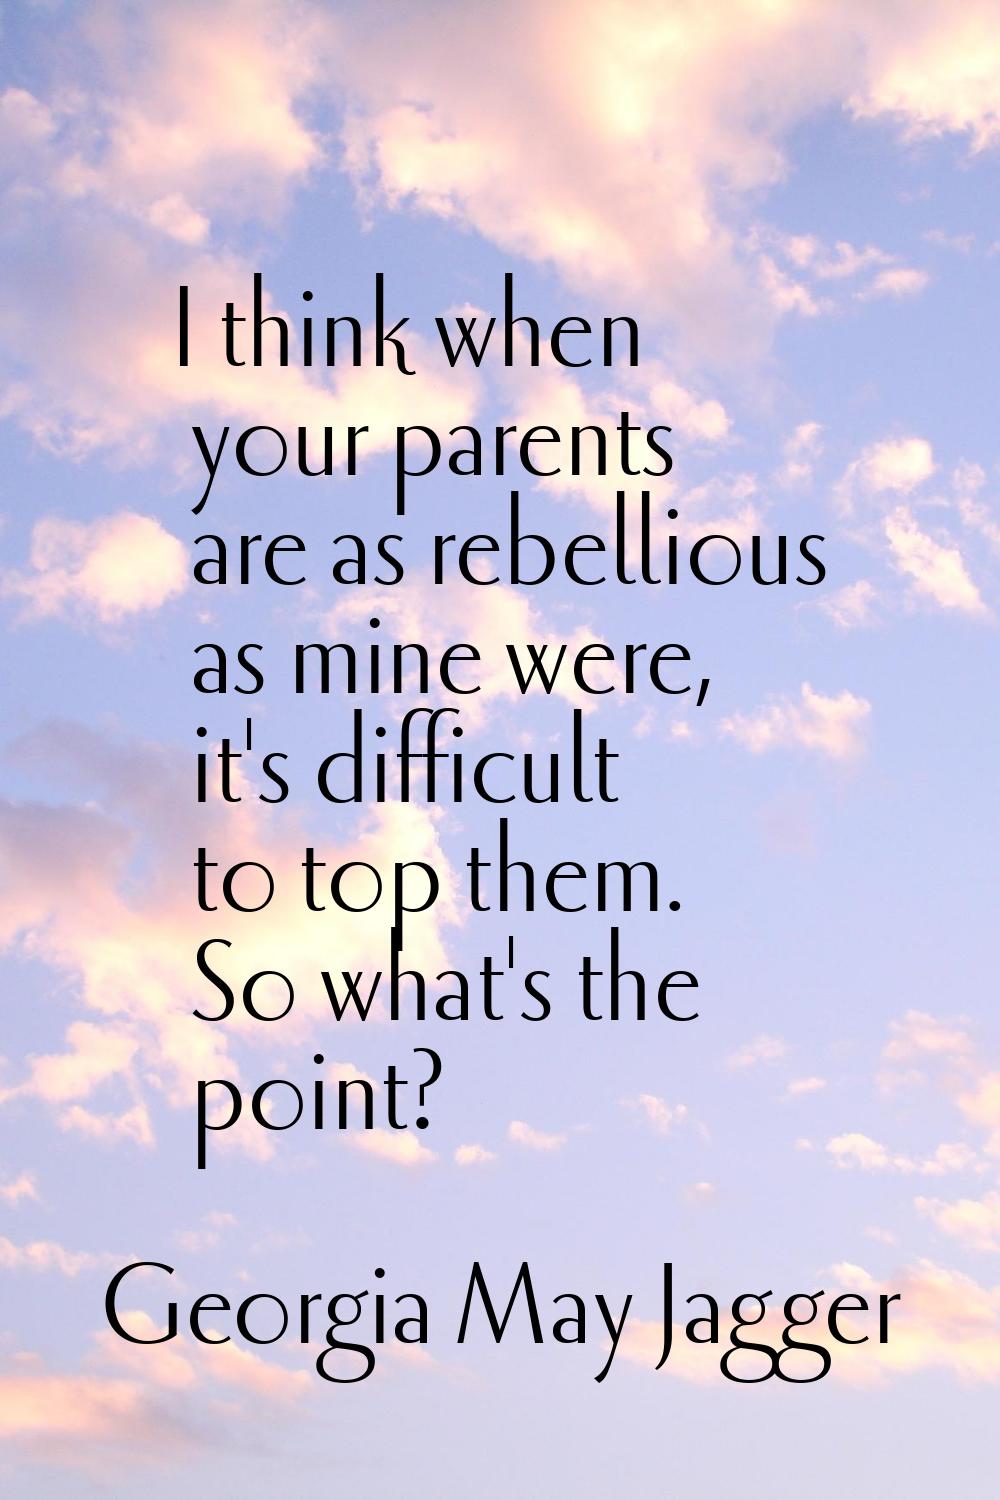 I think when your parents are as rebellious as mine were, it's difficult to top them. So what's the